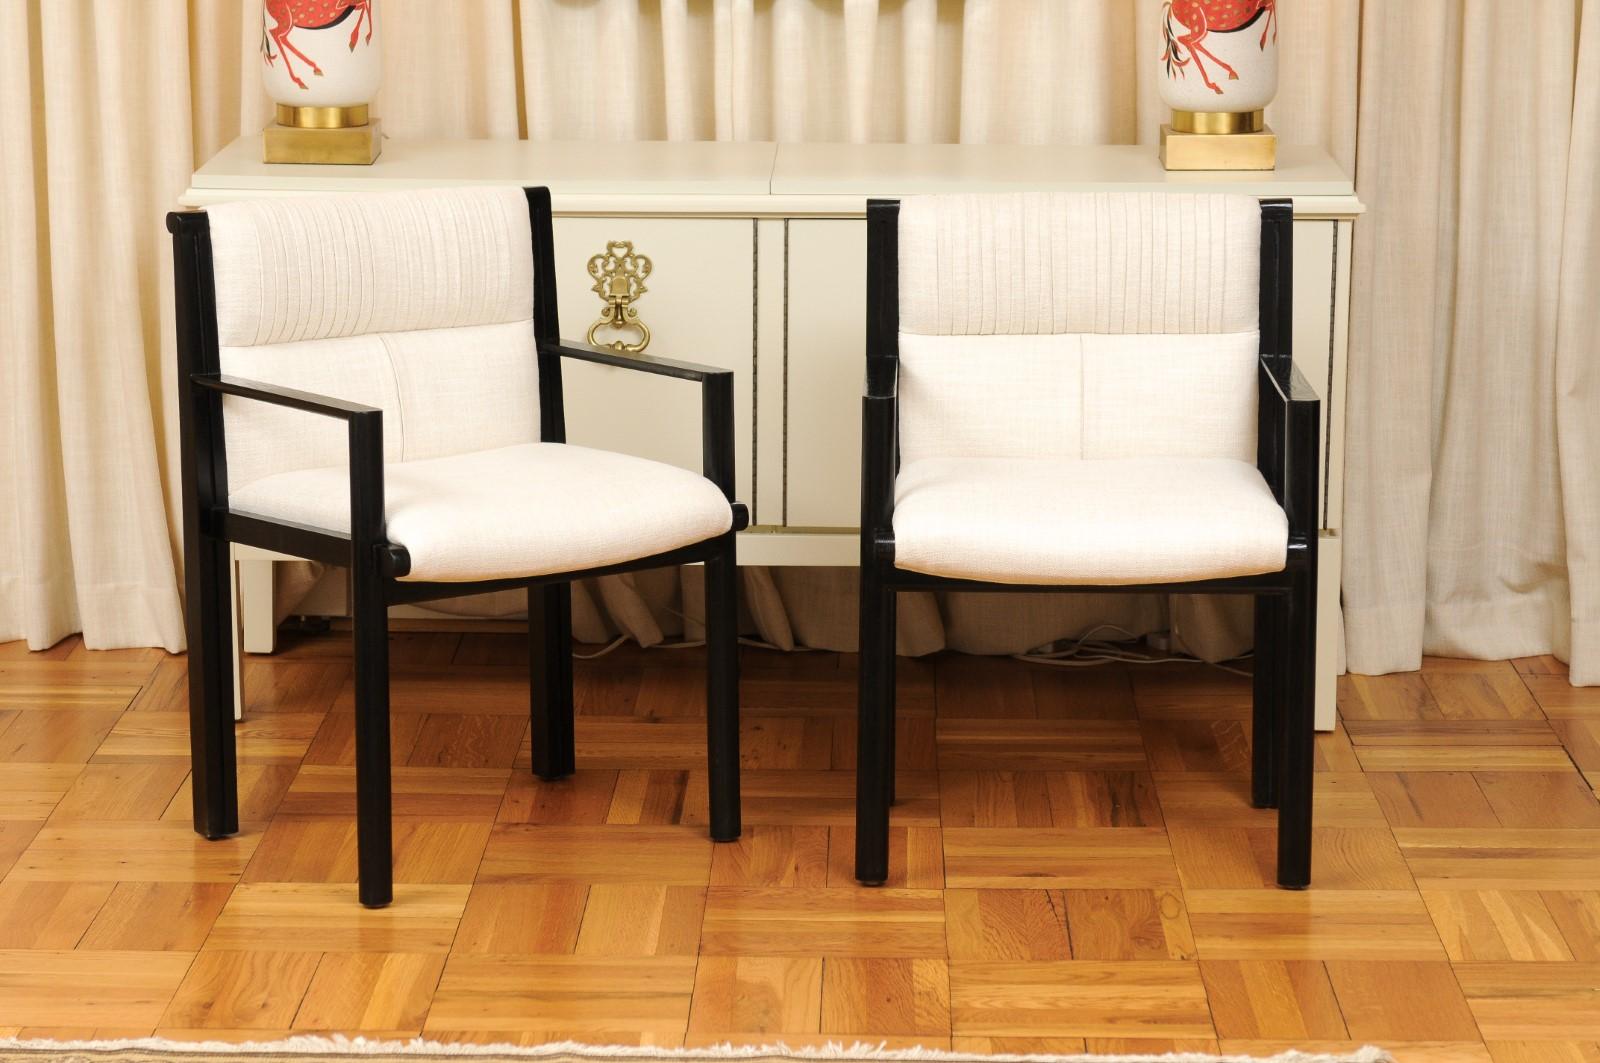 These magnificent dining chairs are shipped as professionally photographed and described in the listing narrative: meticulously professionally restored and completely installation ready. This large All Arm set is unique on the market. Expert custom